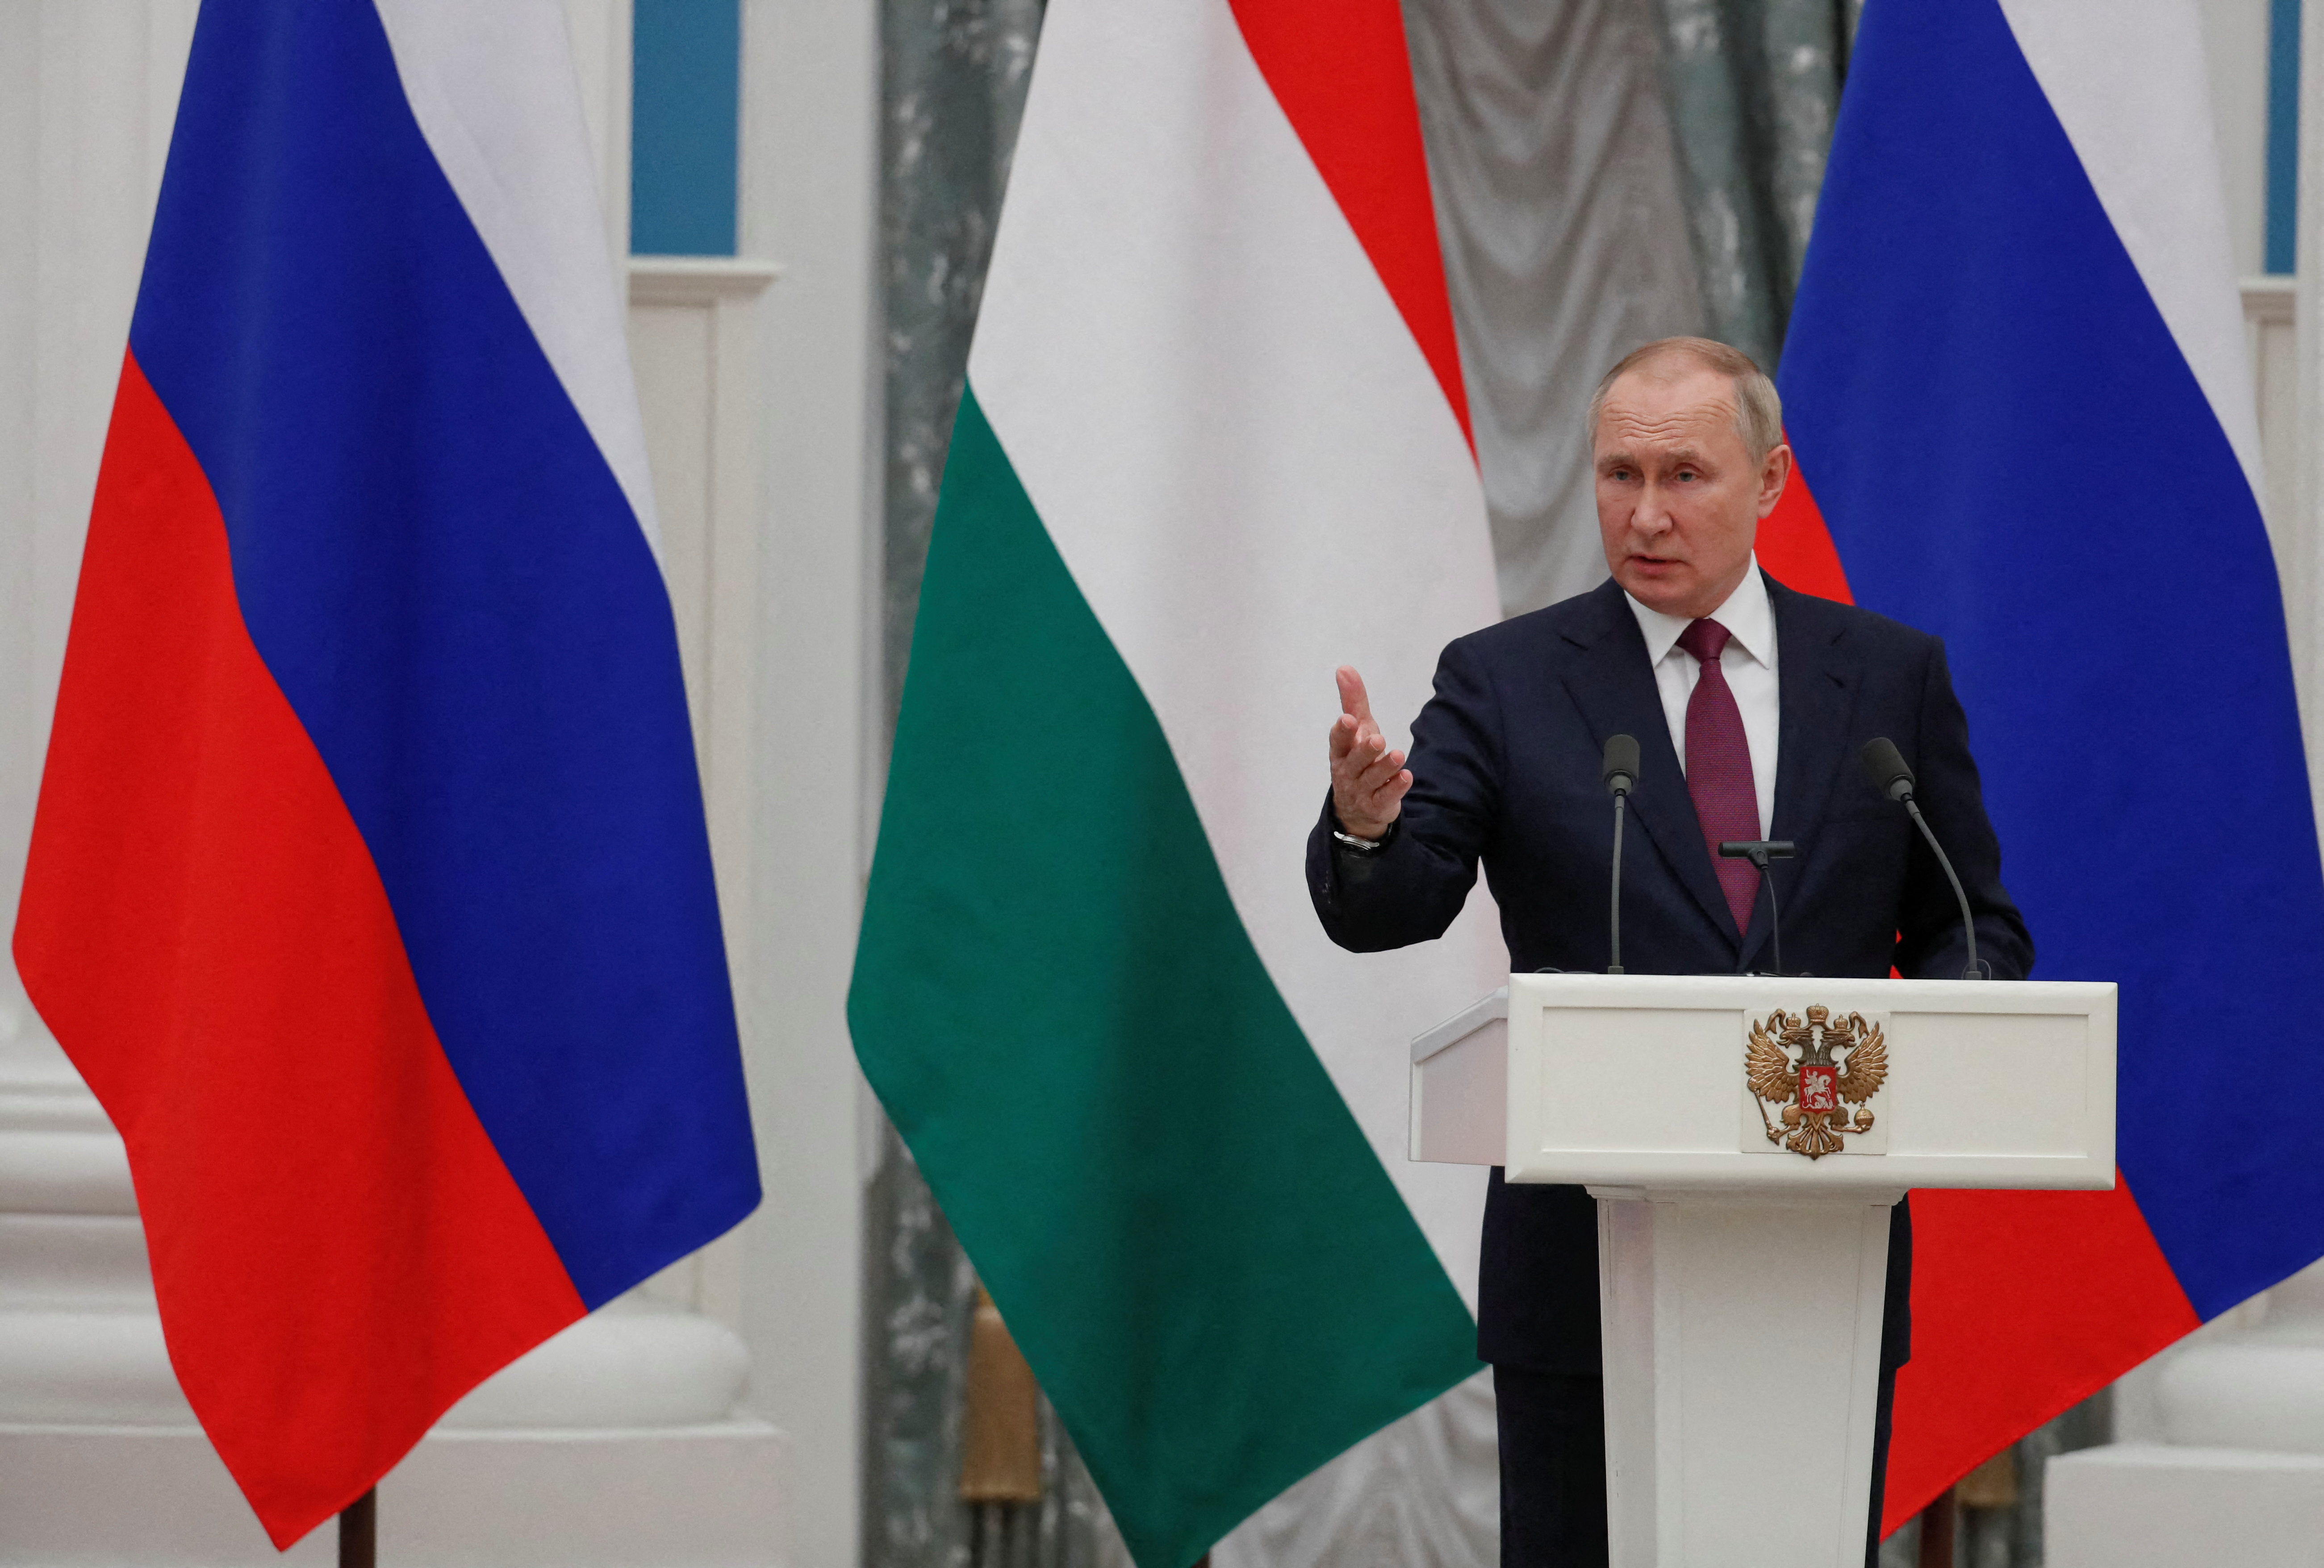 Russian President Putin meets with Hungarian Prime Minister Orban in Moscow